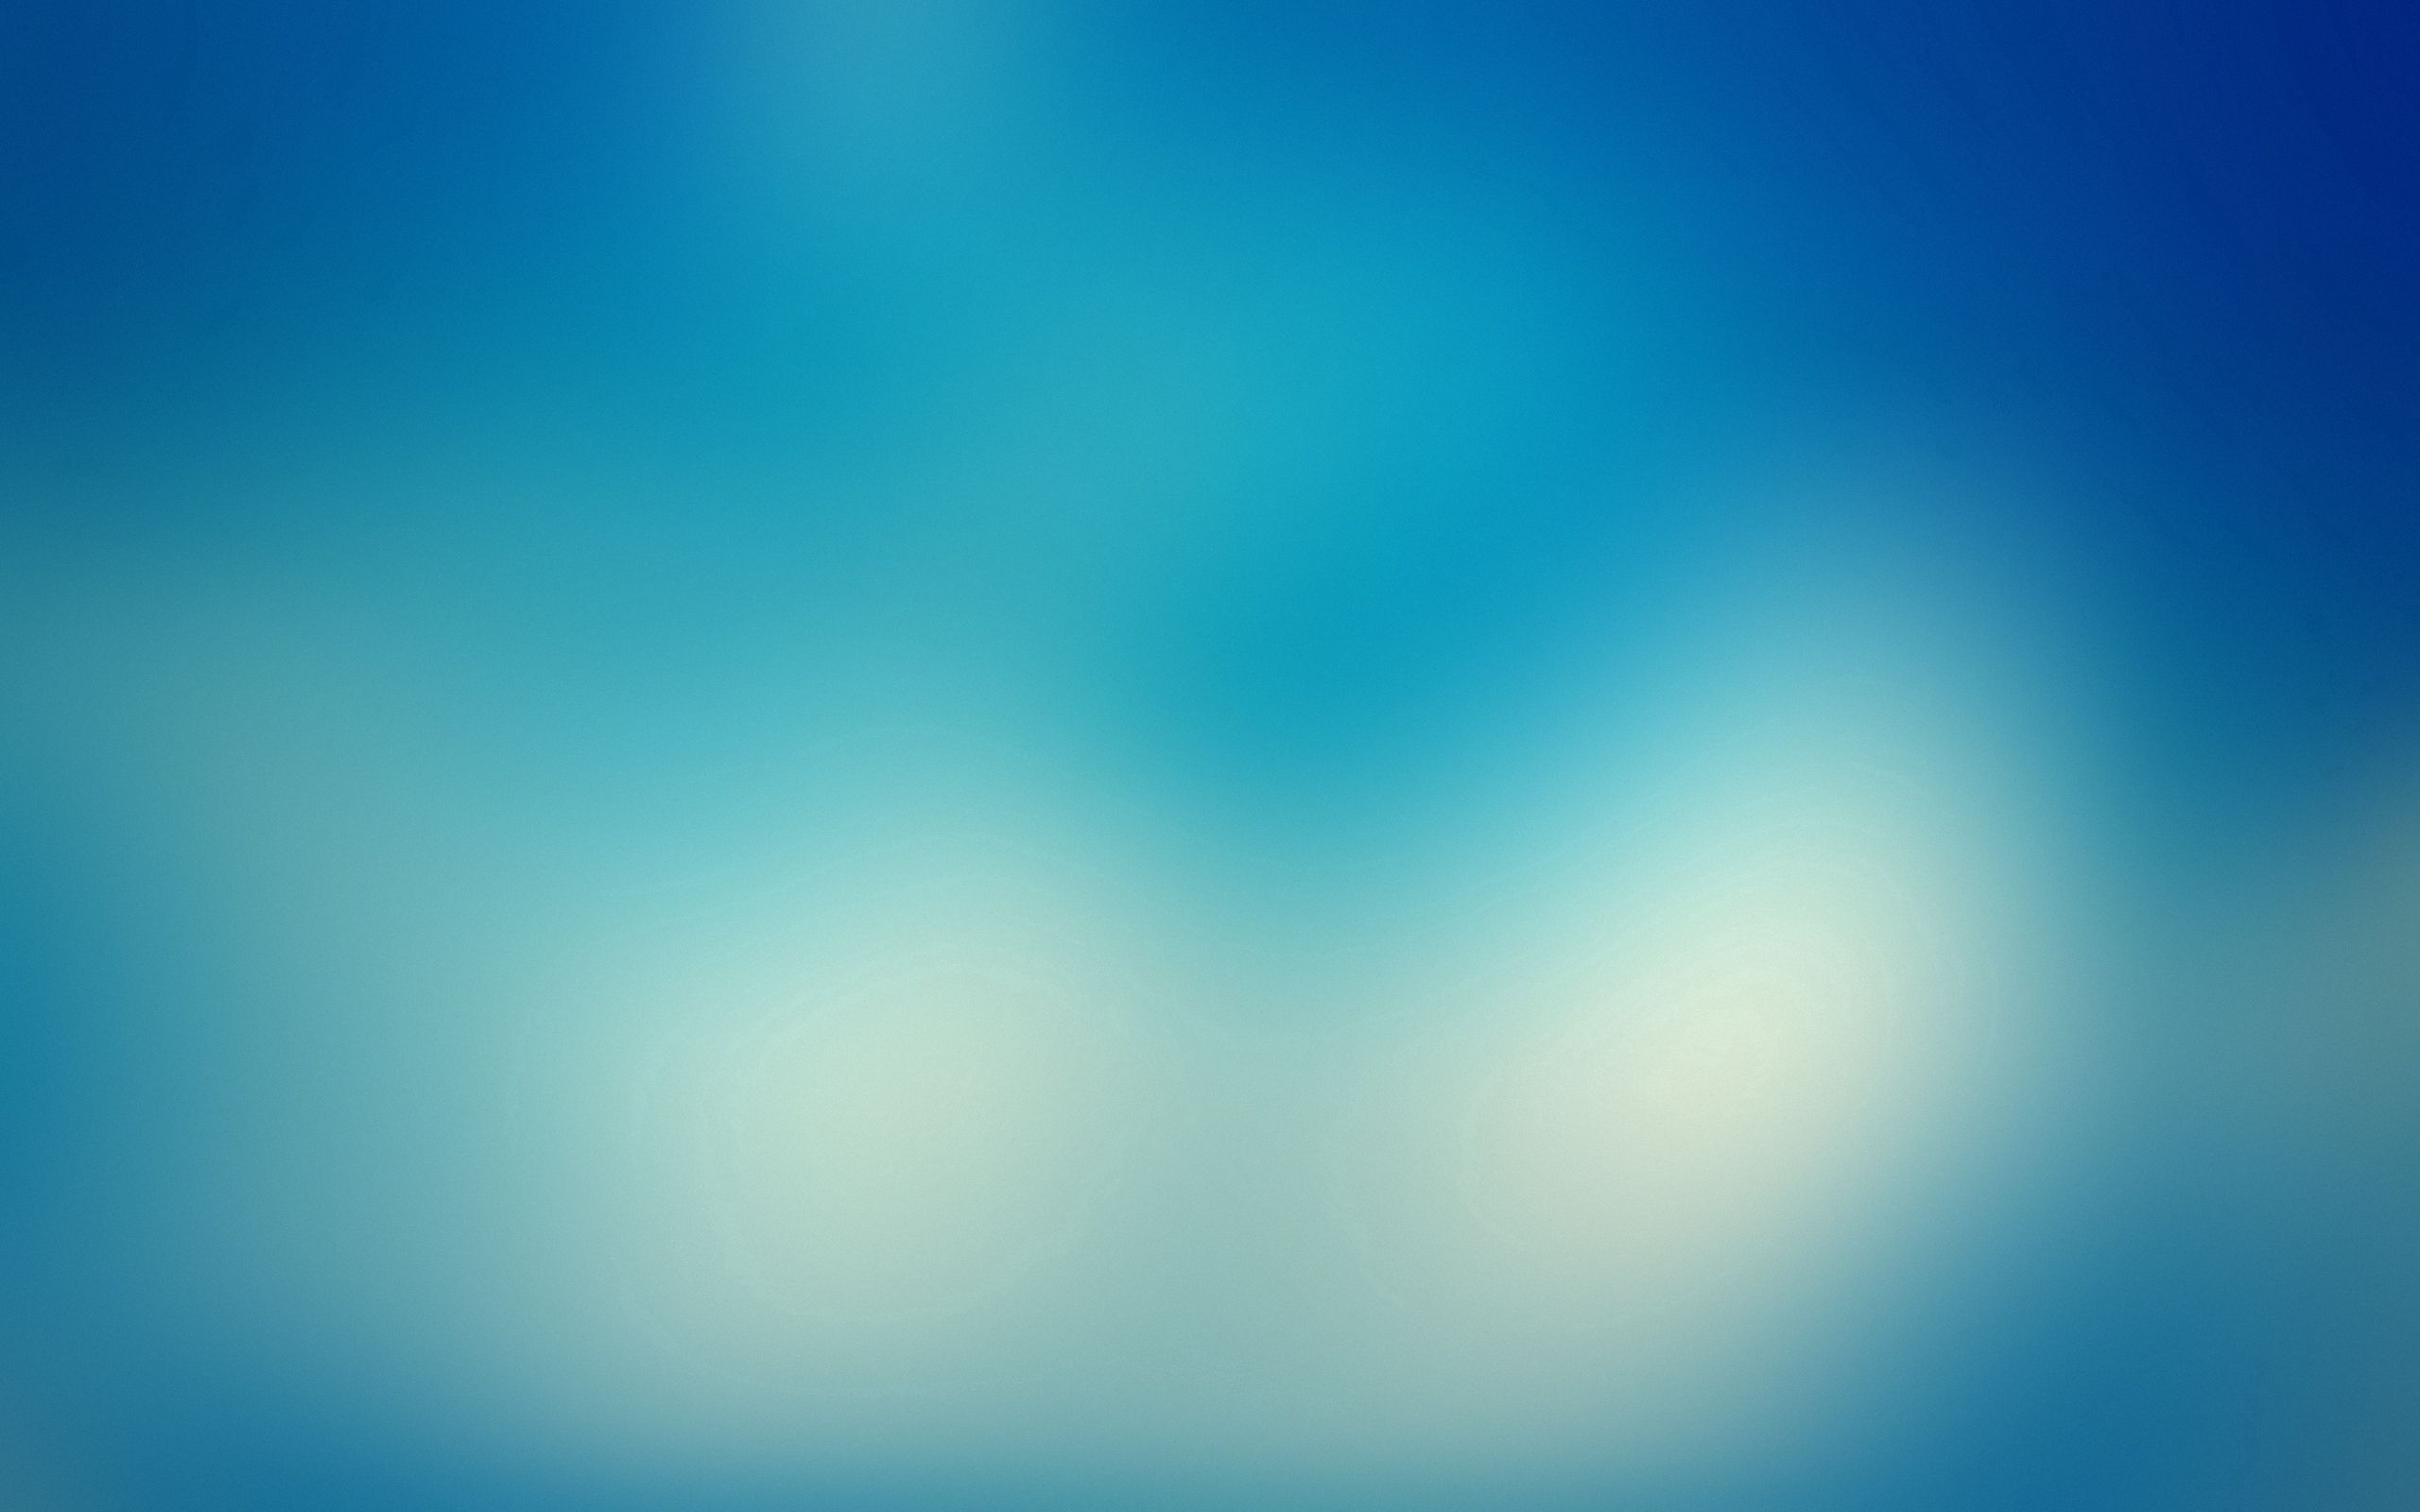 140685 download wallpaper abstract, background, blue, stains, spots, monochromatic, plain screensavers and pictures for free